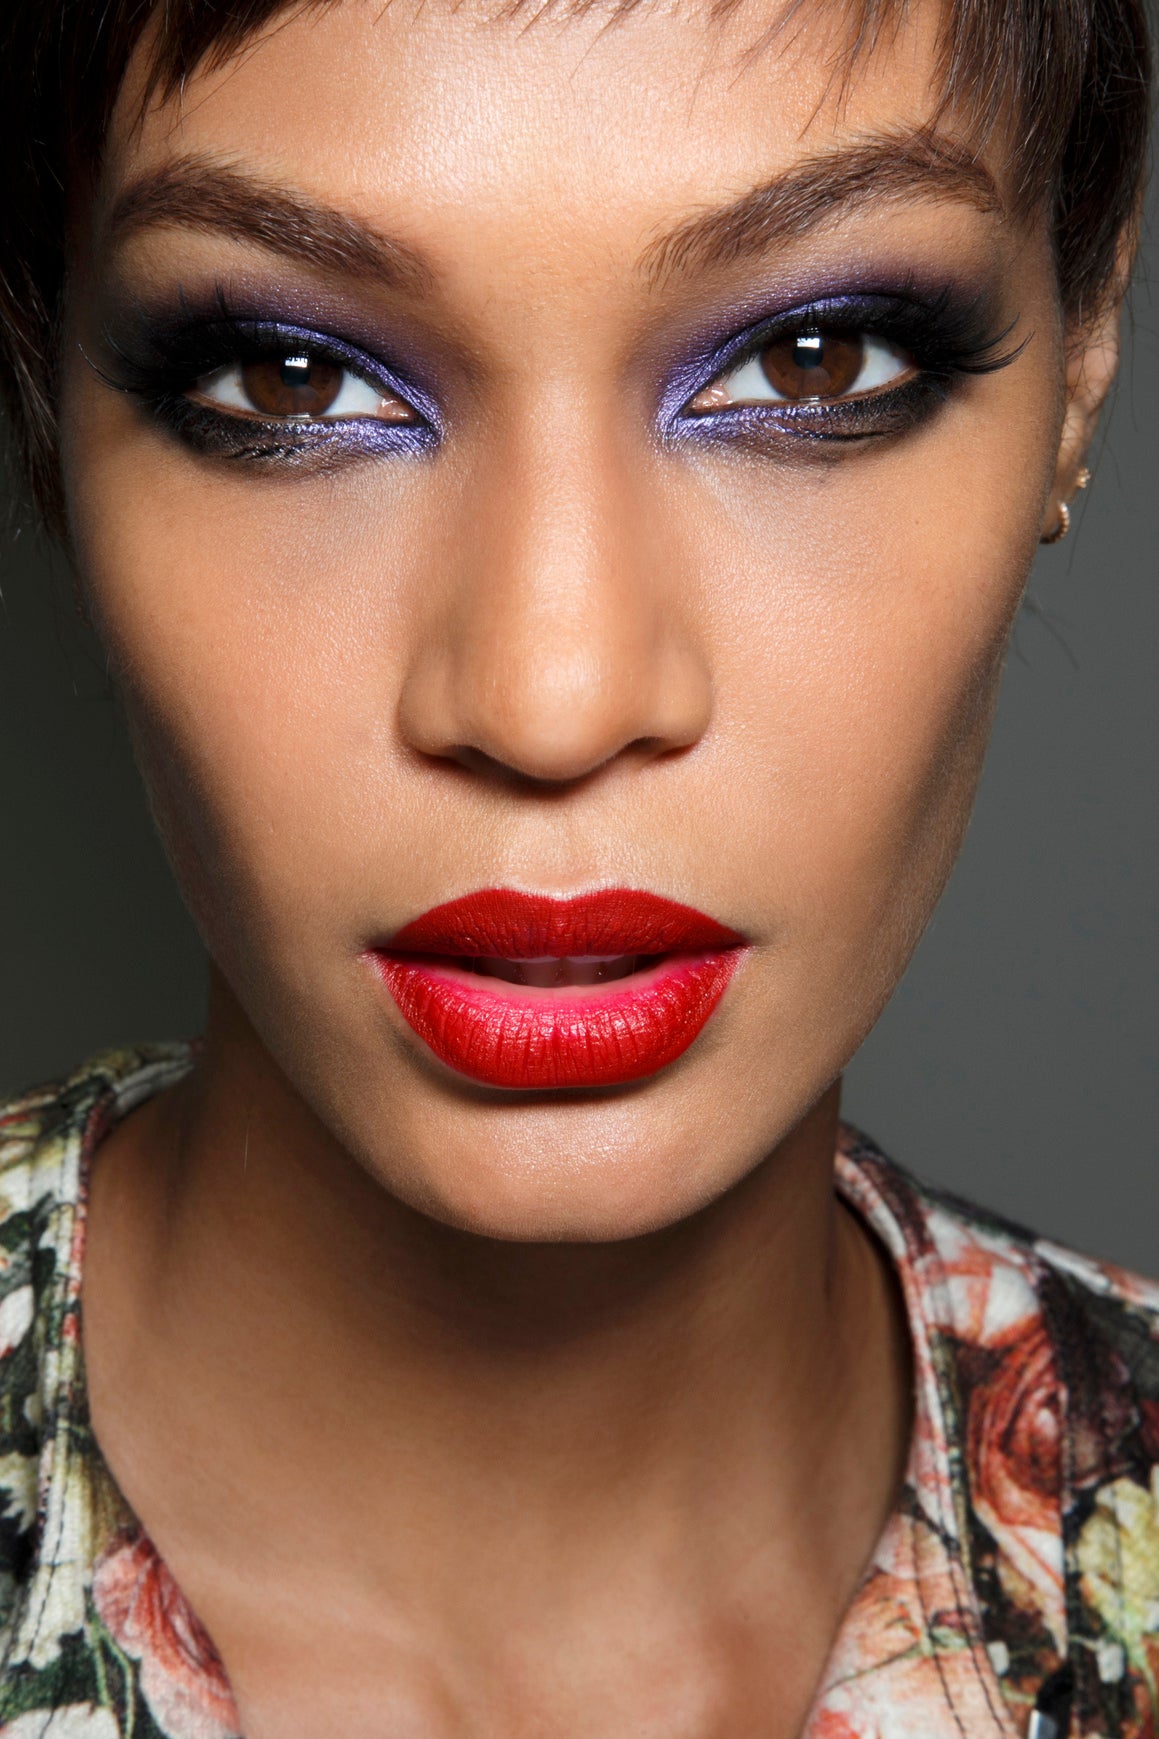 The One Lipstick Trick You've Been Doing All Wrong
